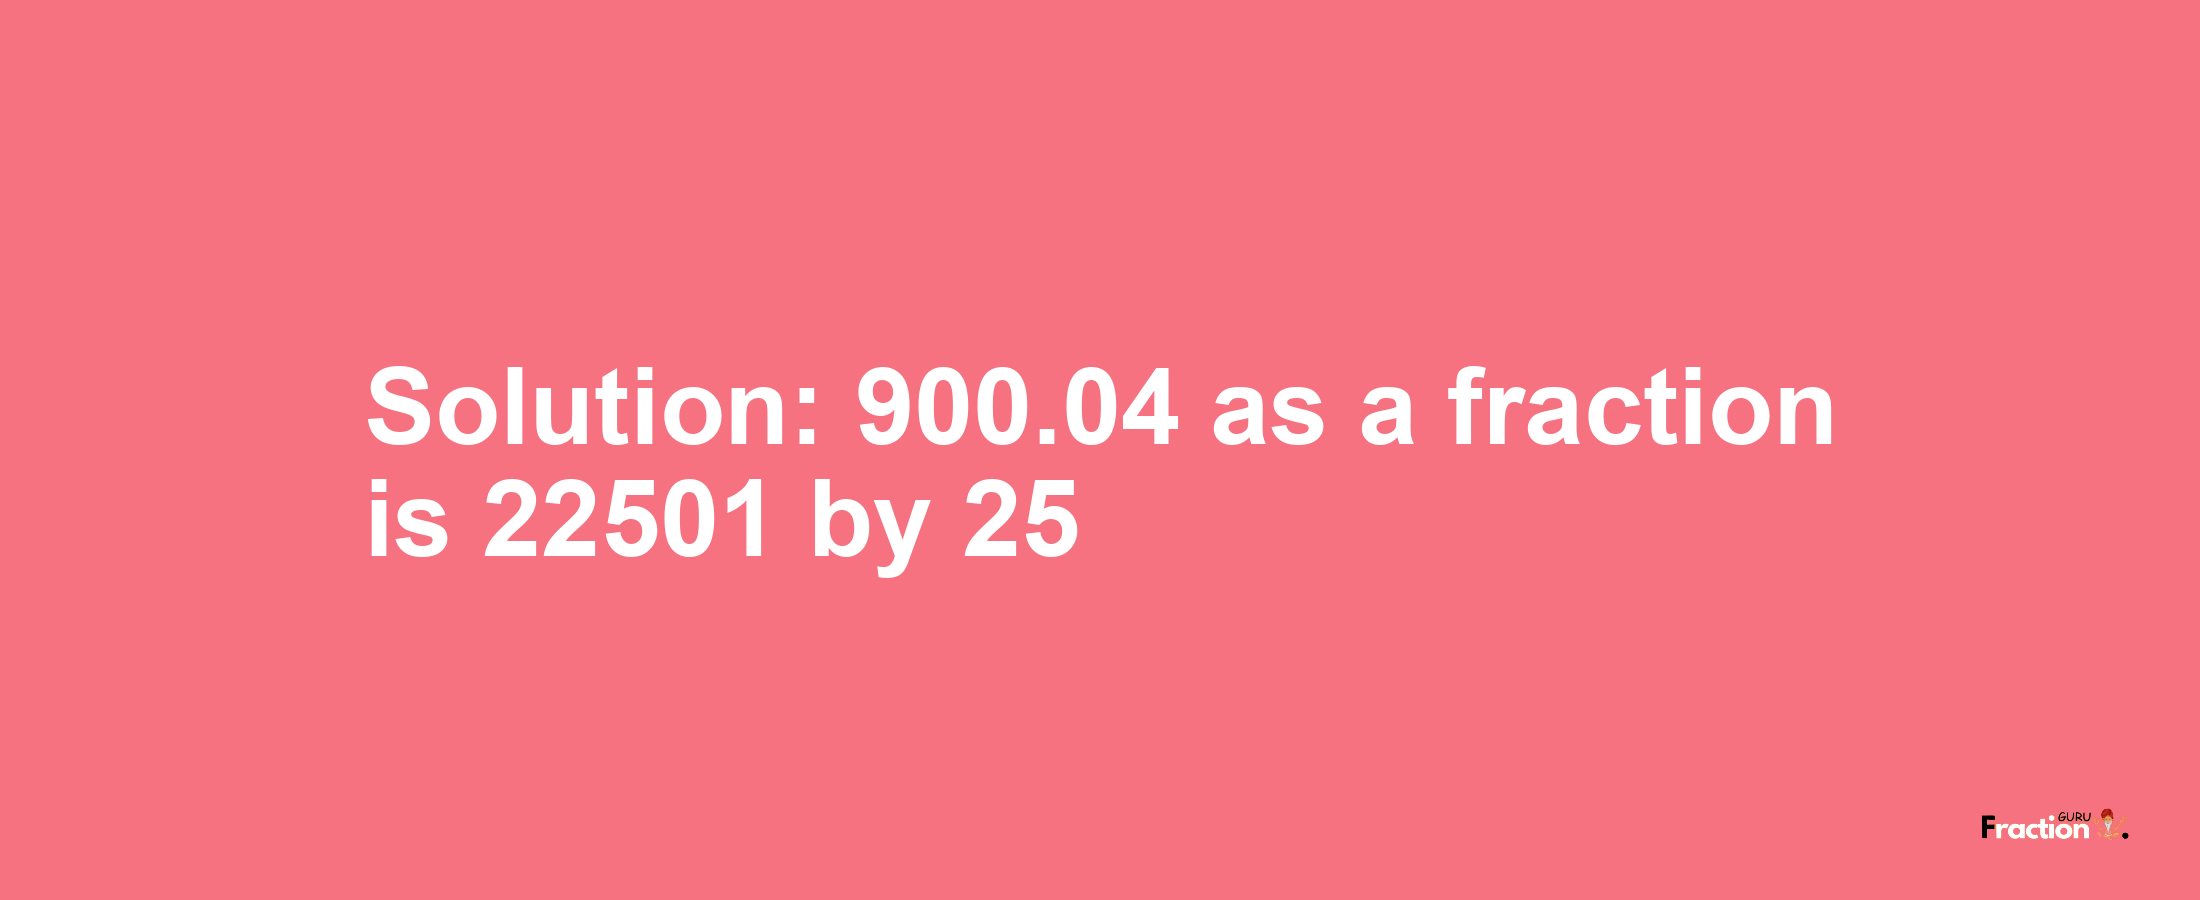 Solution:900.04 as a fraction is 22501/25